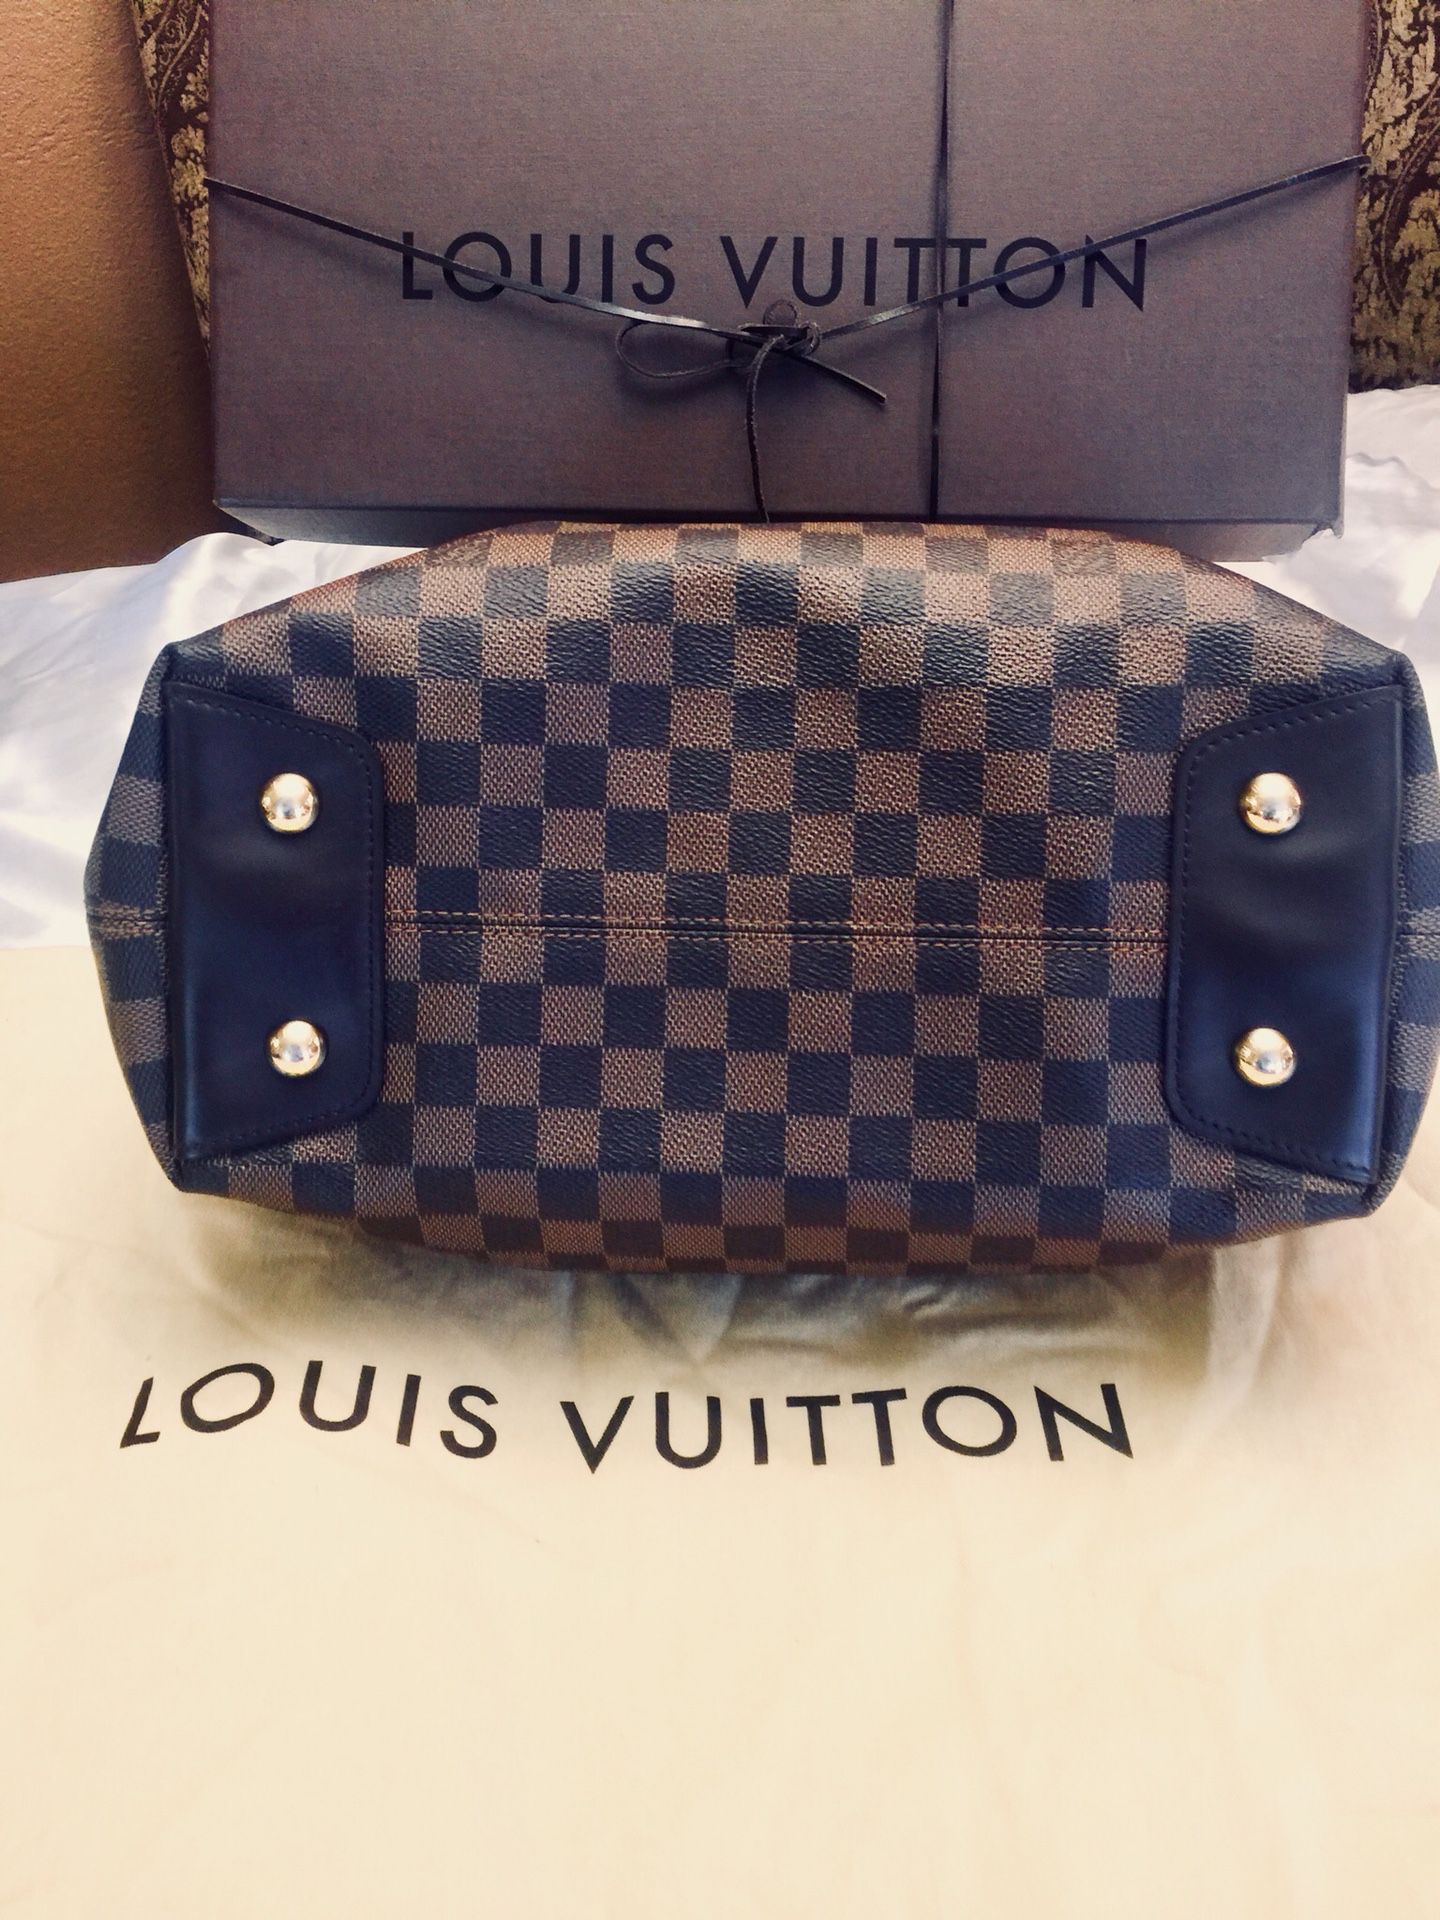 Louis Vuitton Cup Travel bag and shoulder bag, in orang…